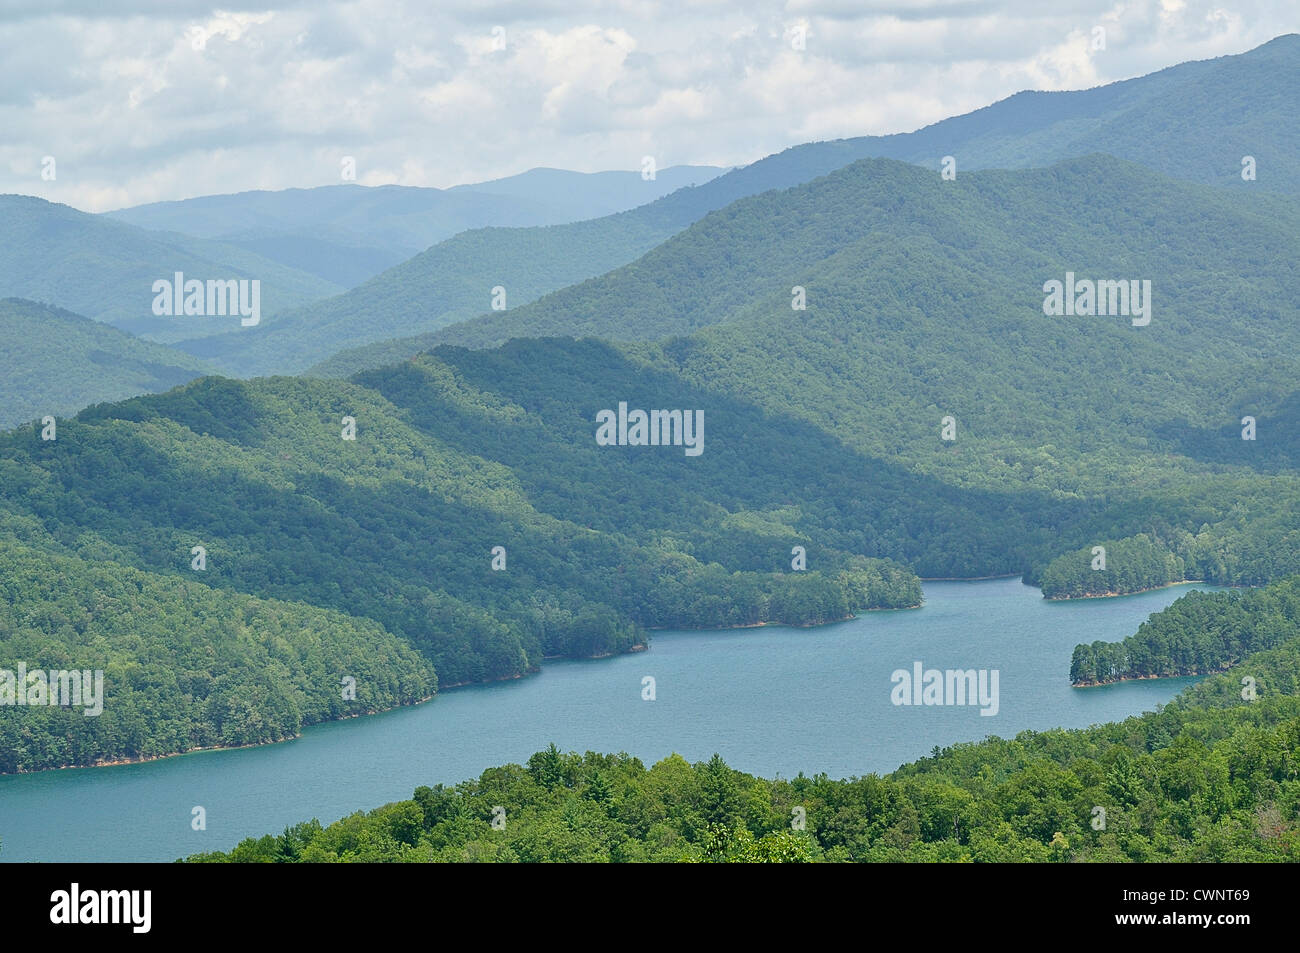 Blue haze across the mountains of its name sake with Fontana lake in the foreground. Stock Photo